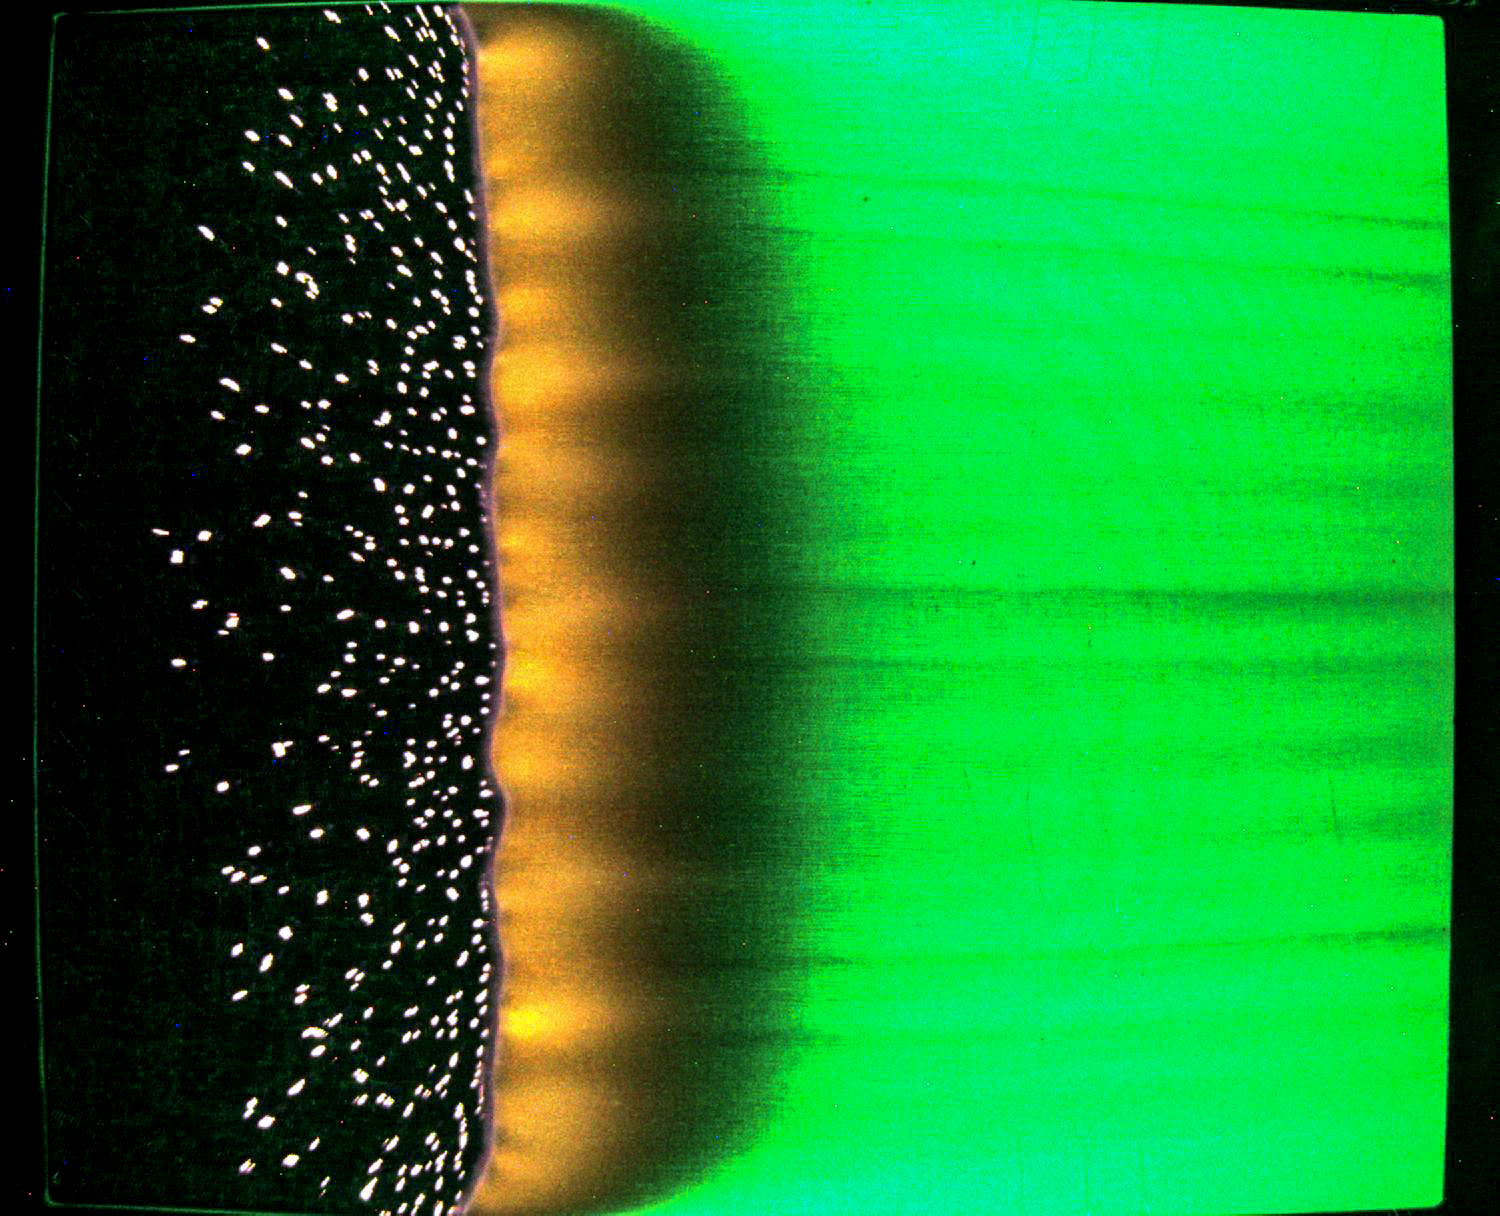 green fabric burns from left to right with particles of ash on the left and a flame line in the center